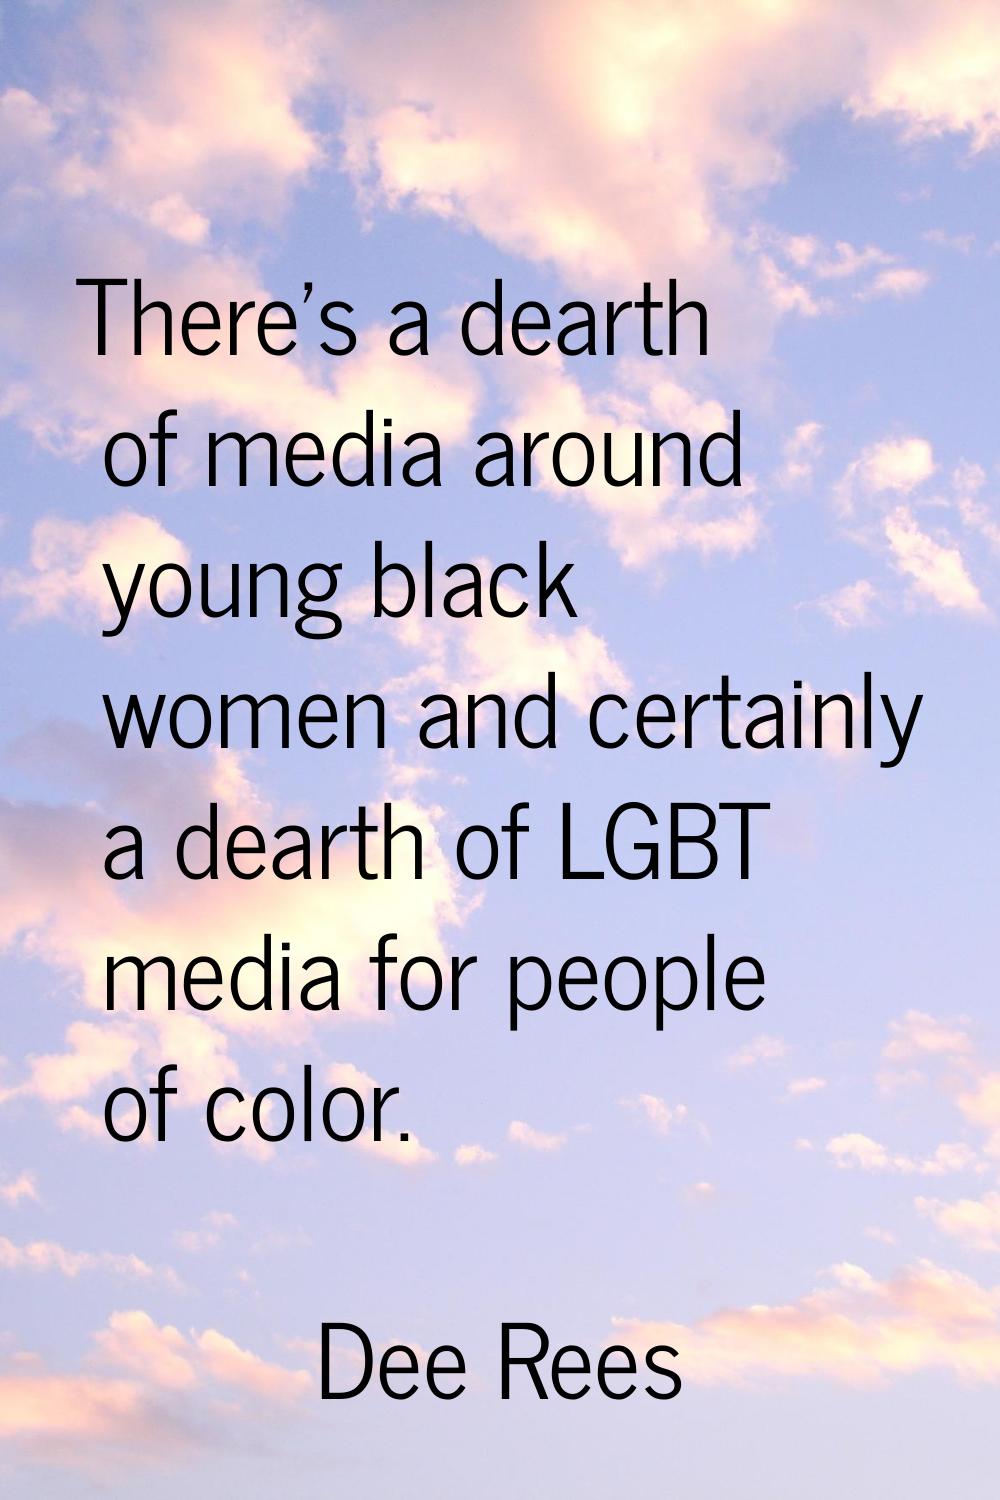 There's a dearth of media around young black women and certainly a dearth of LGBT media for people 